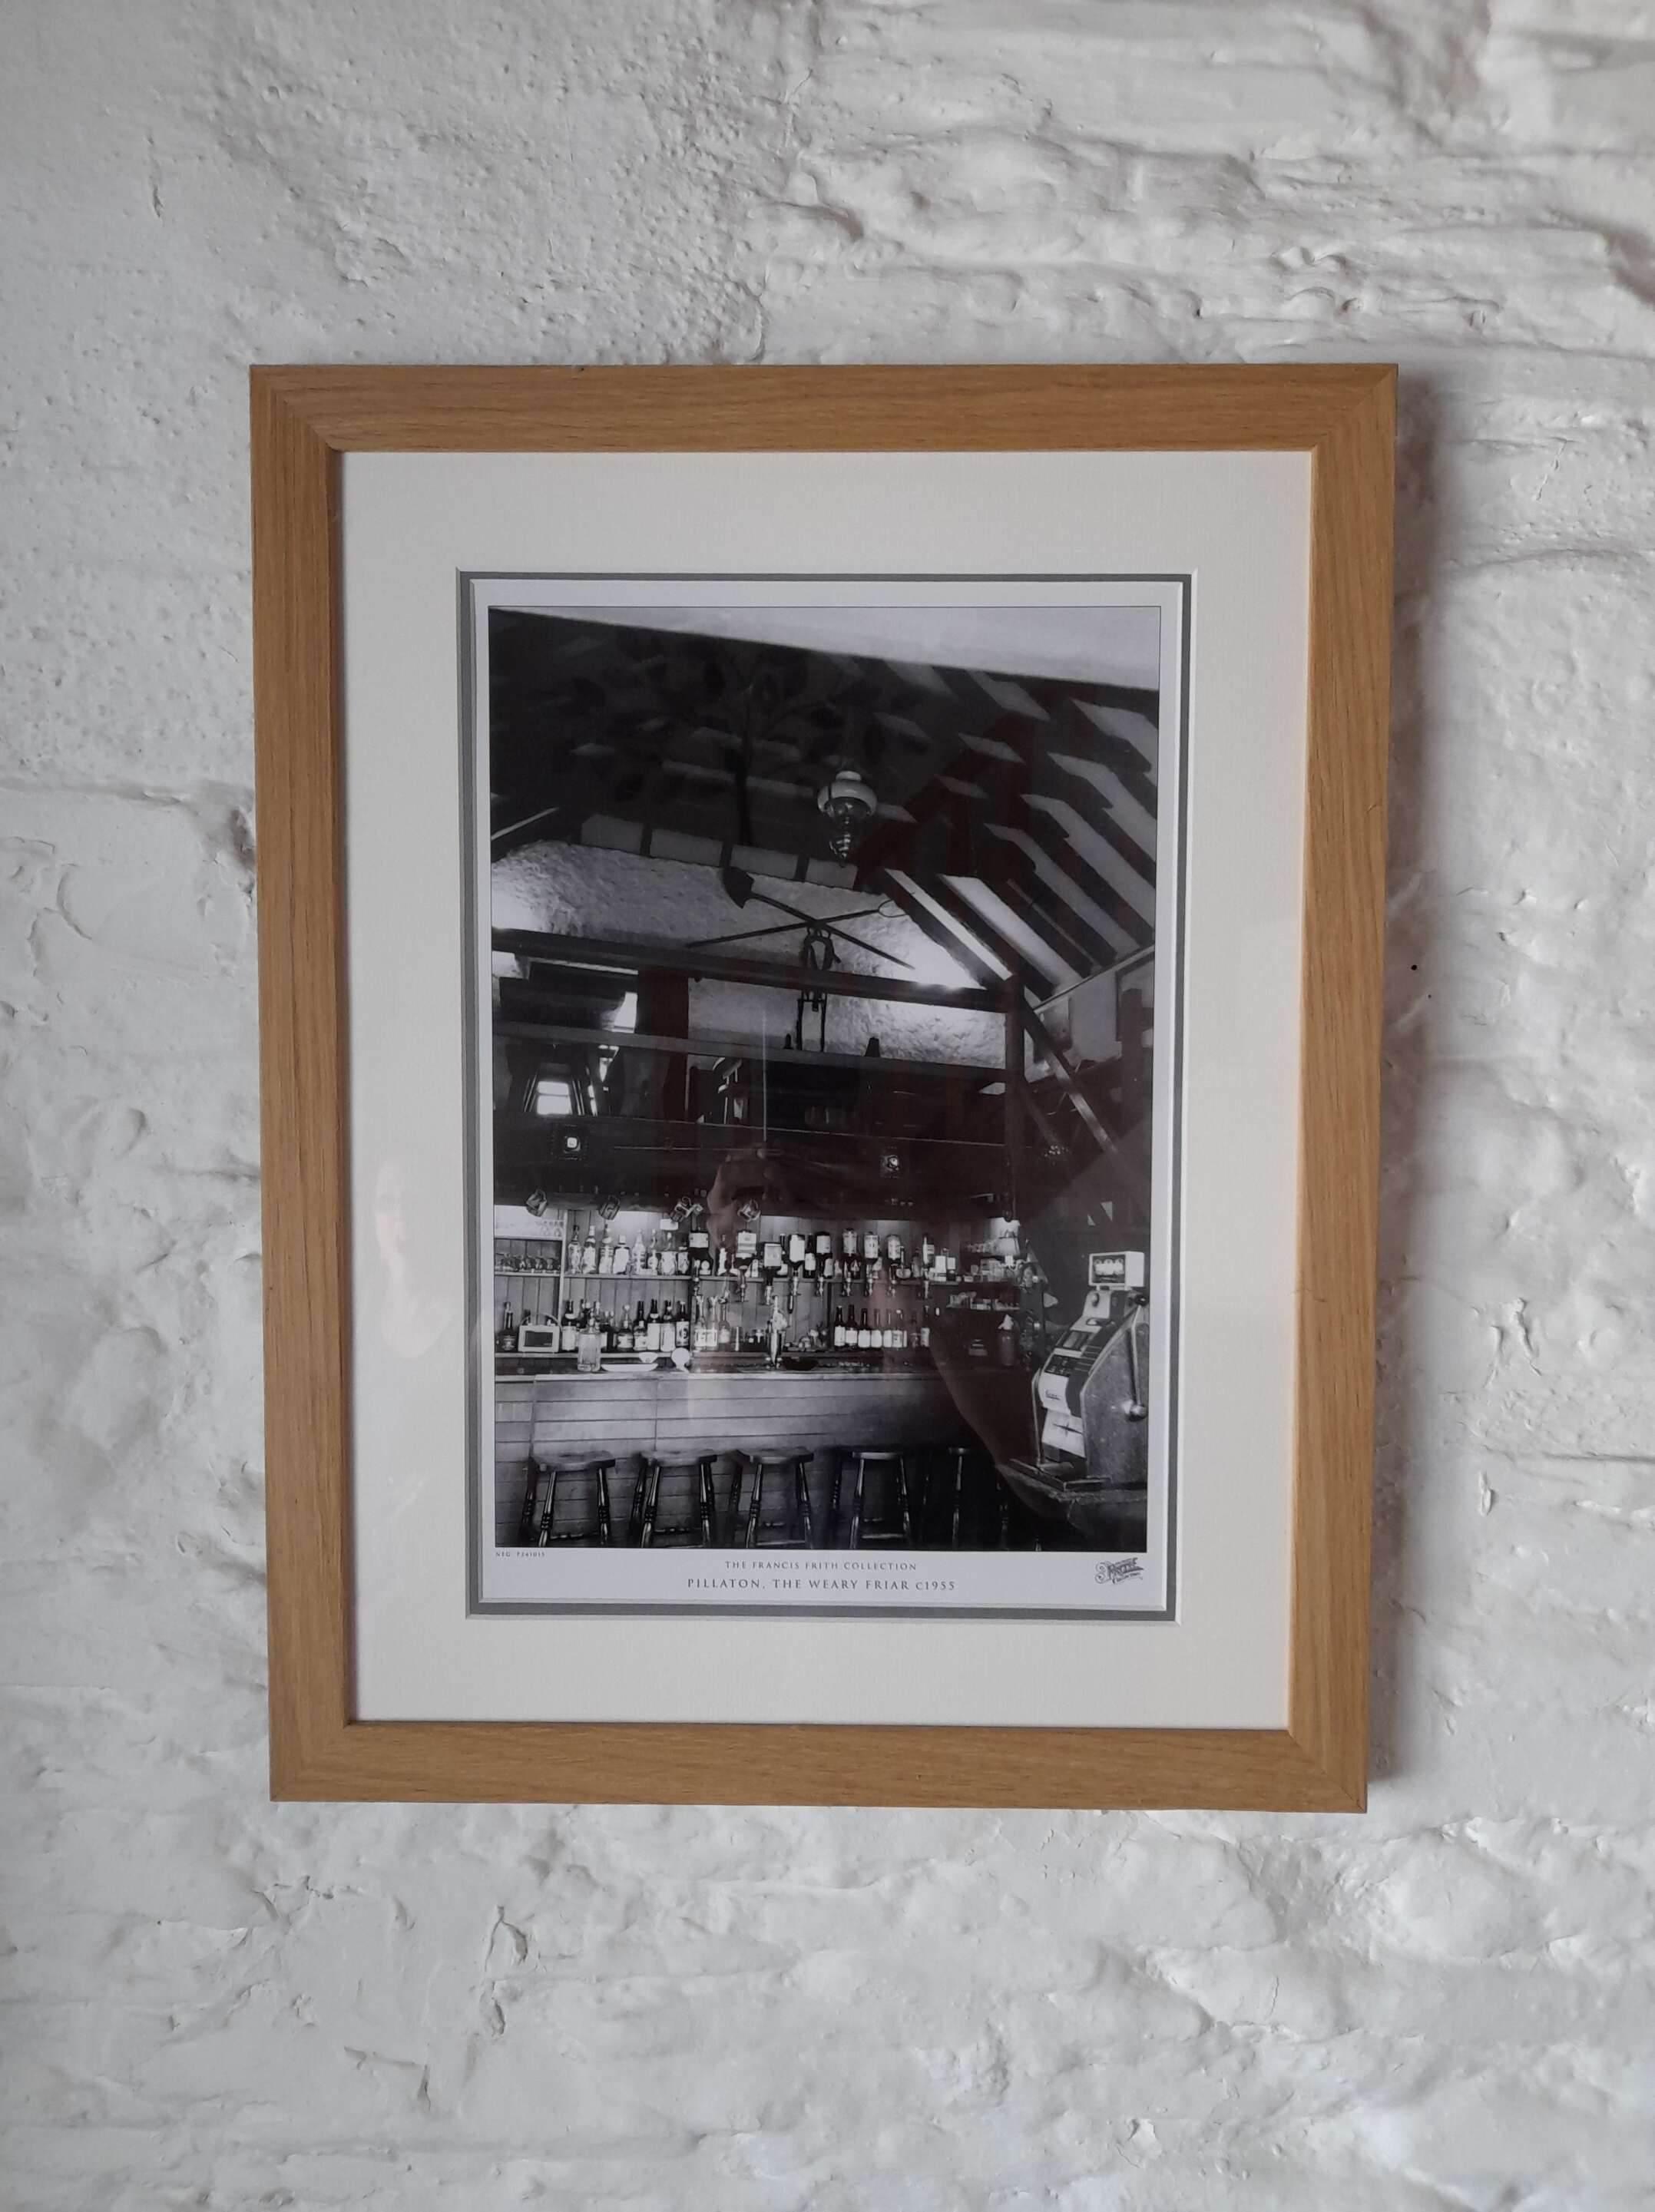 Pictures of The Weary Friar Inn and Pillaton